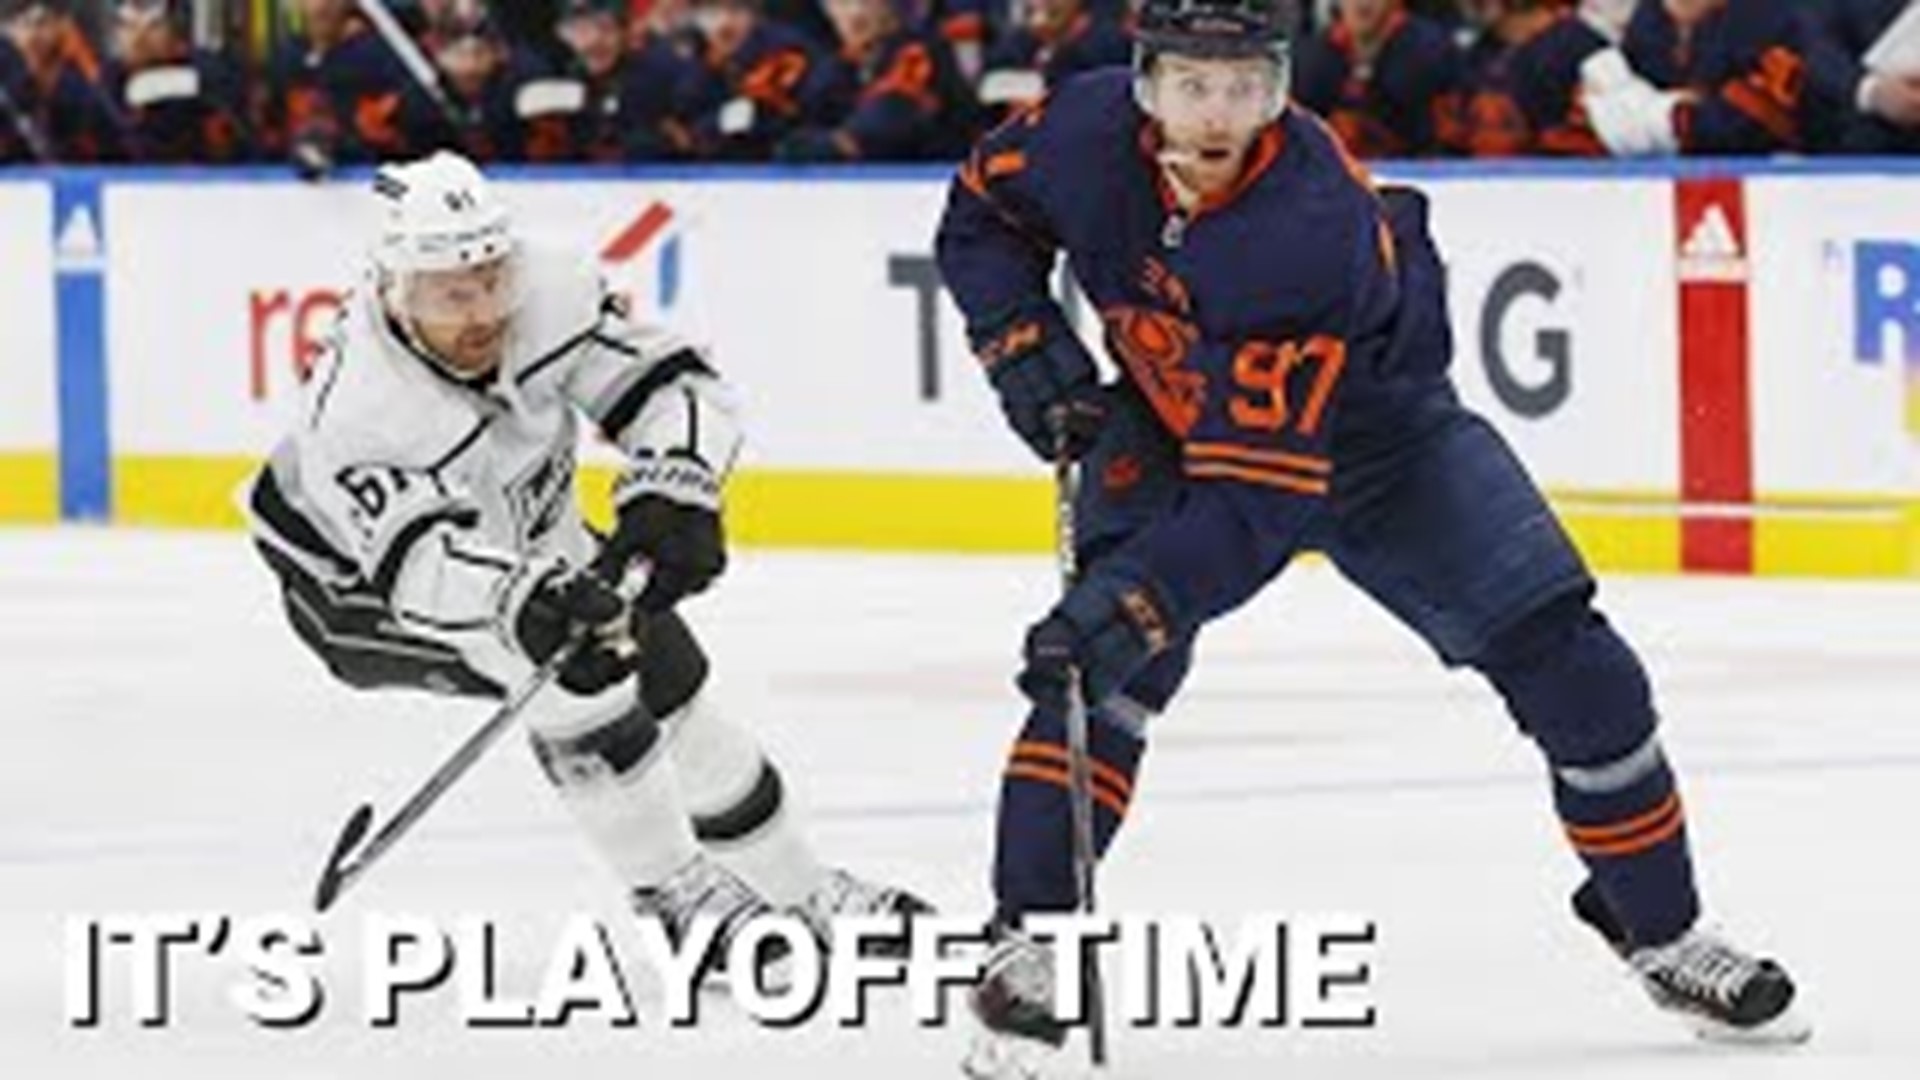 Connor McDavid and the Edmonton Oilers are set to face the Los Angeles Kings in the playoffs for the third straight season. Can the Oilers find a way to win again?